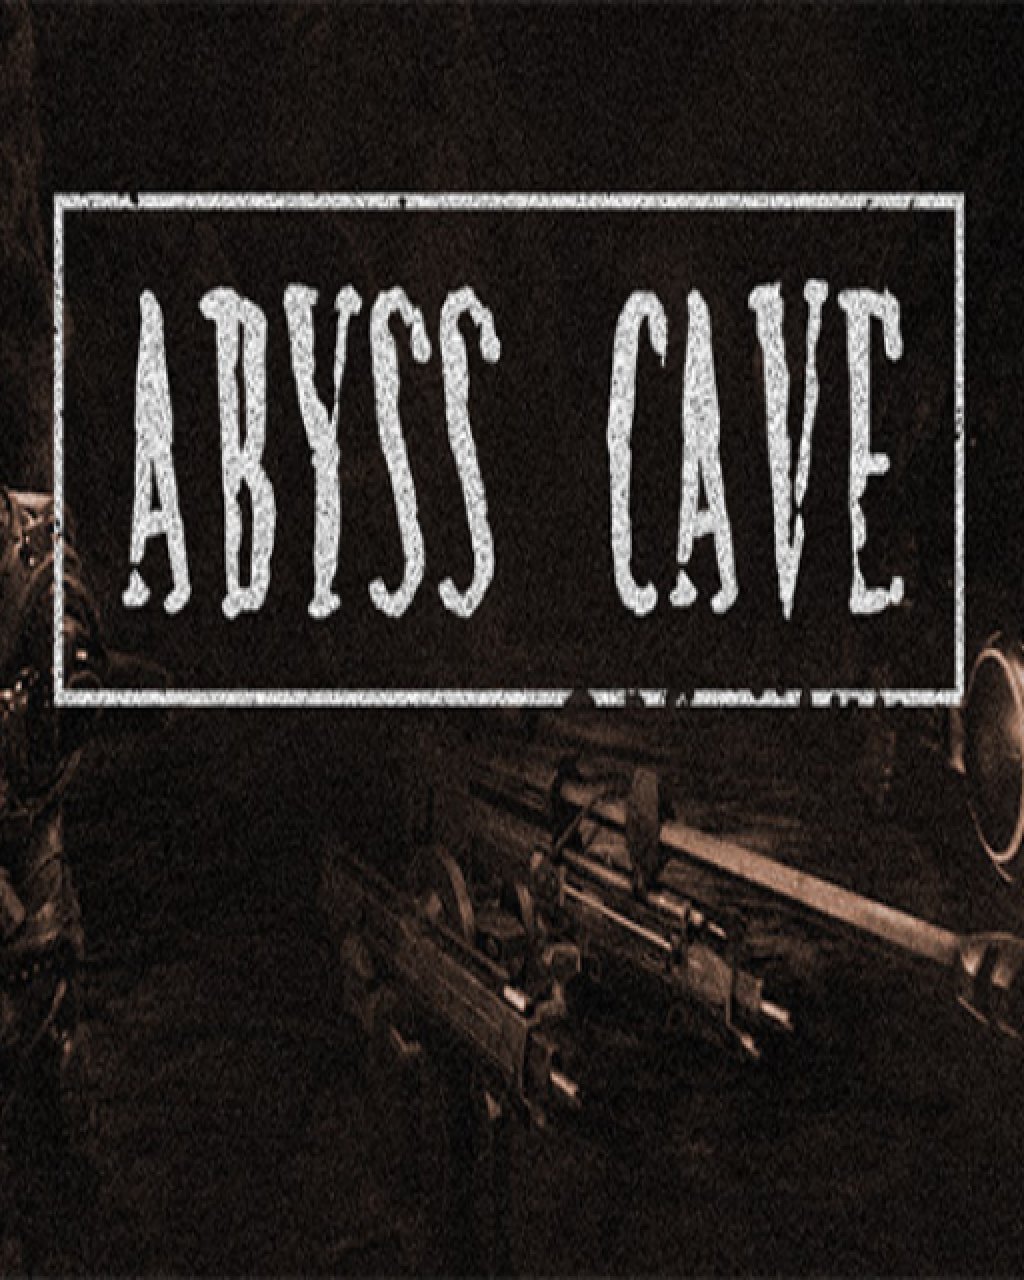 Abyss Cave